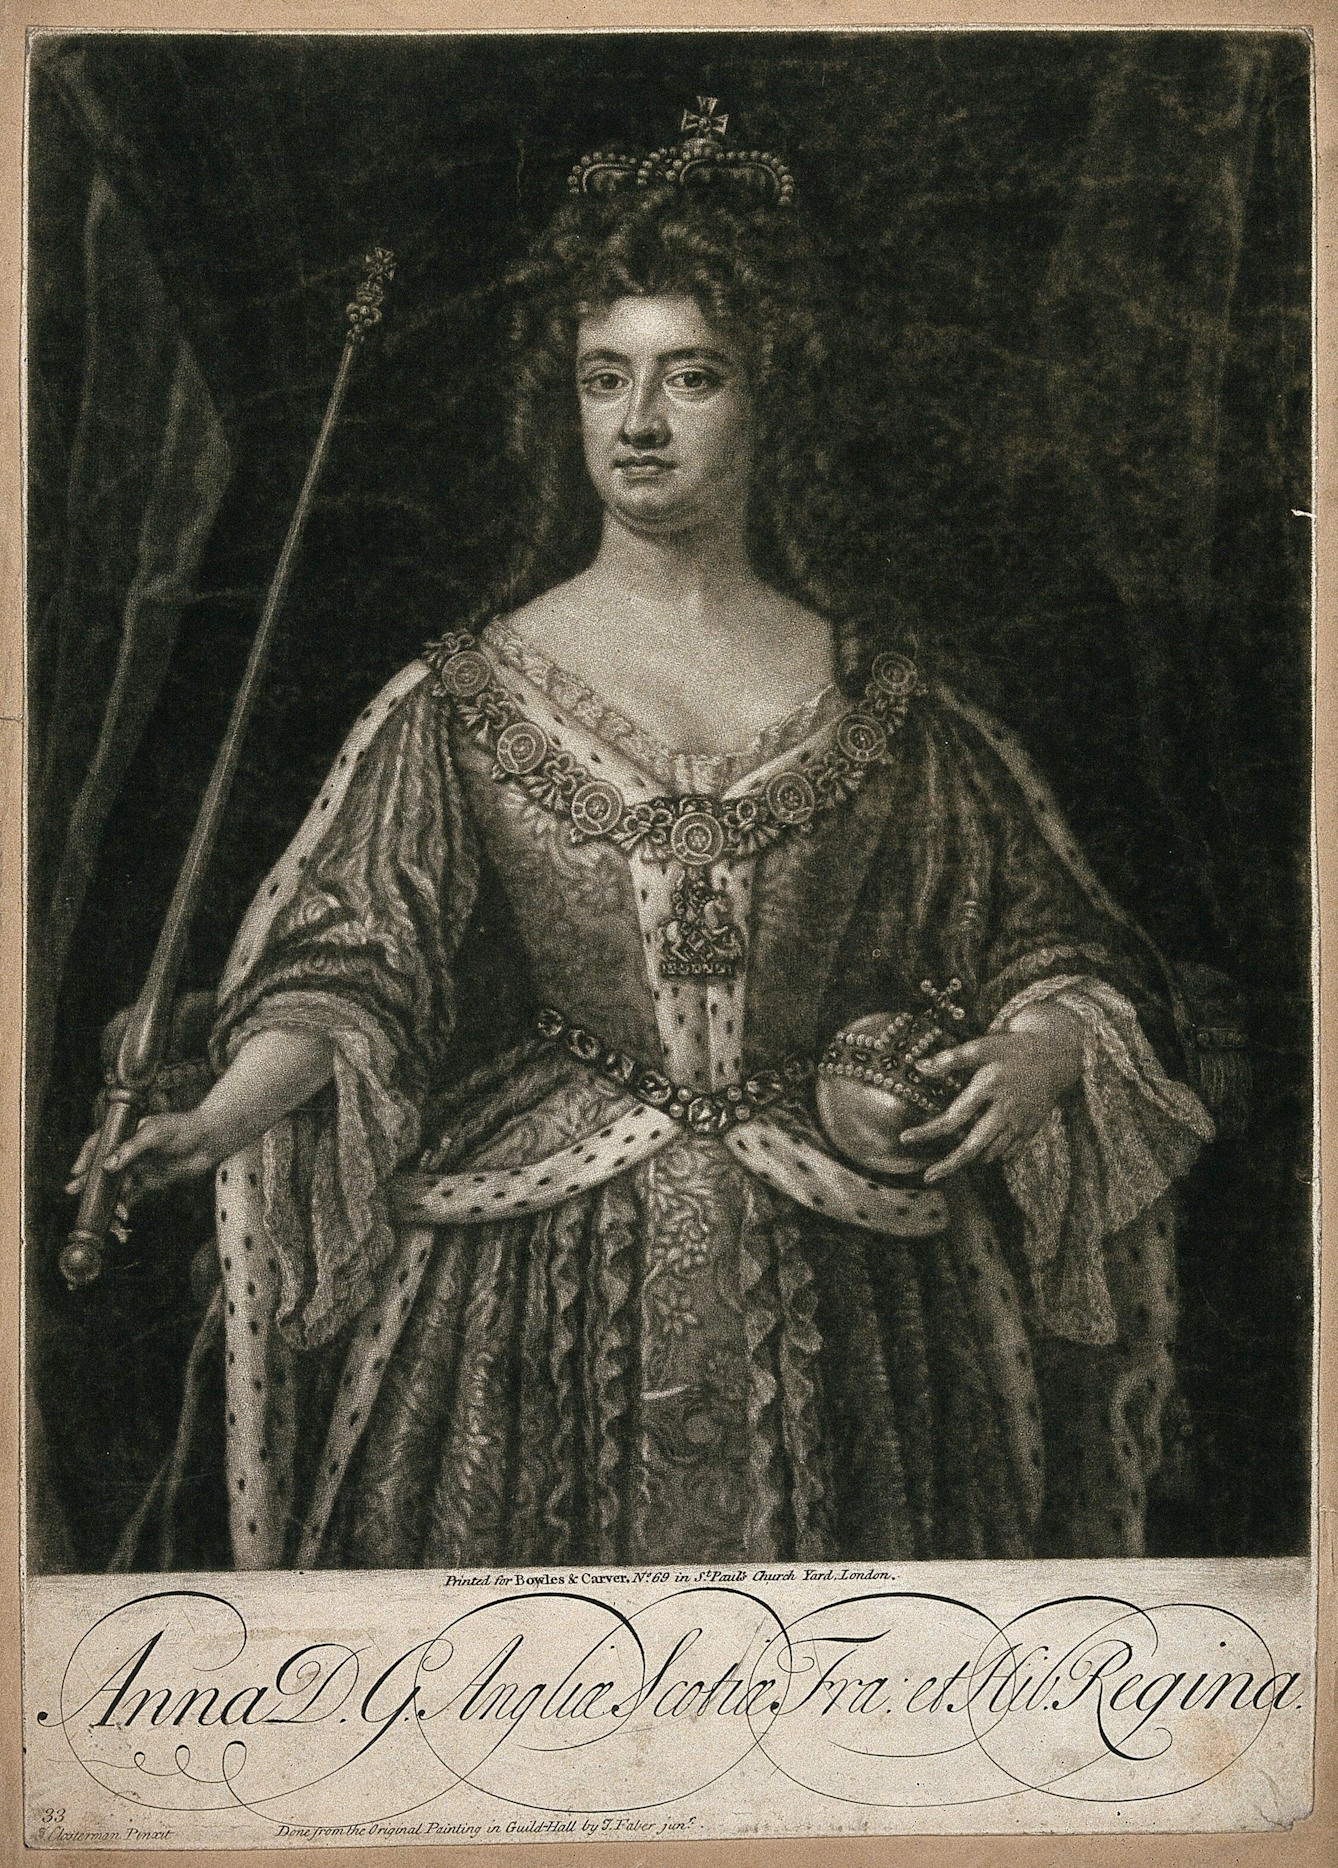 Mezzotint of Queen Anne of Great Britain, holding an orb and a sceptre. Anne has a regal demenour and wears an embellished dress and bejewelled crown. 